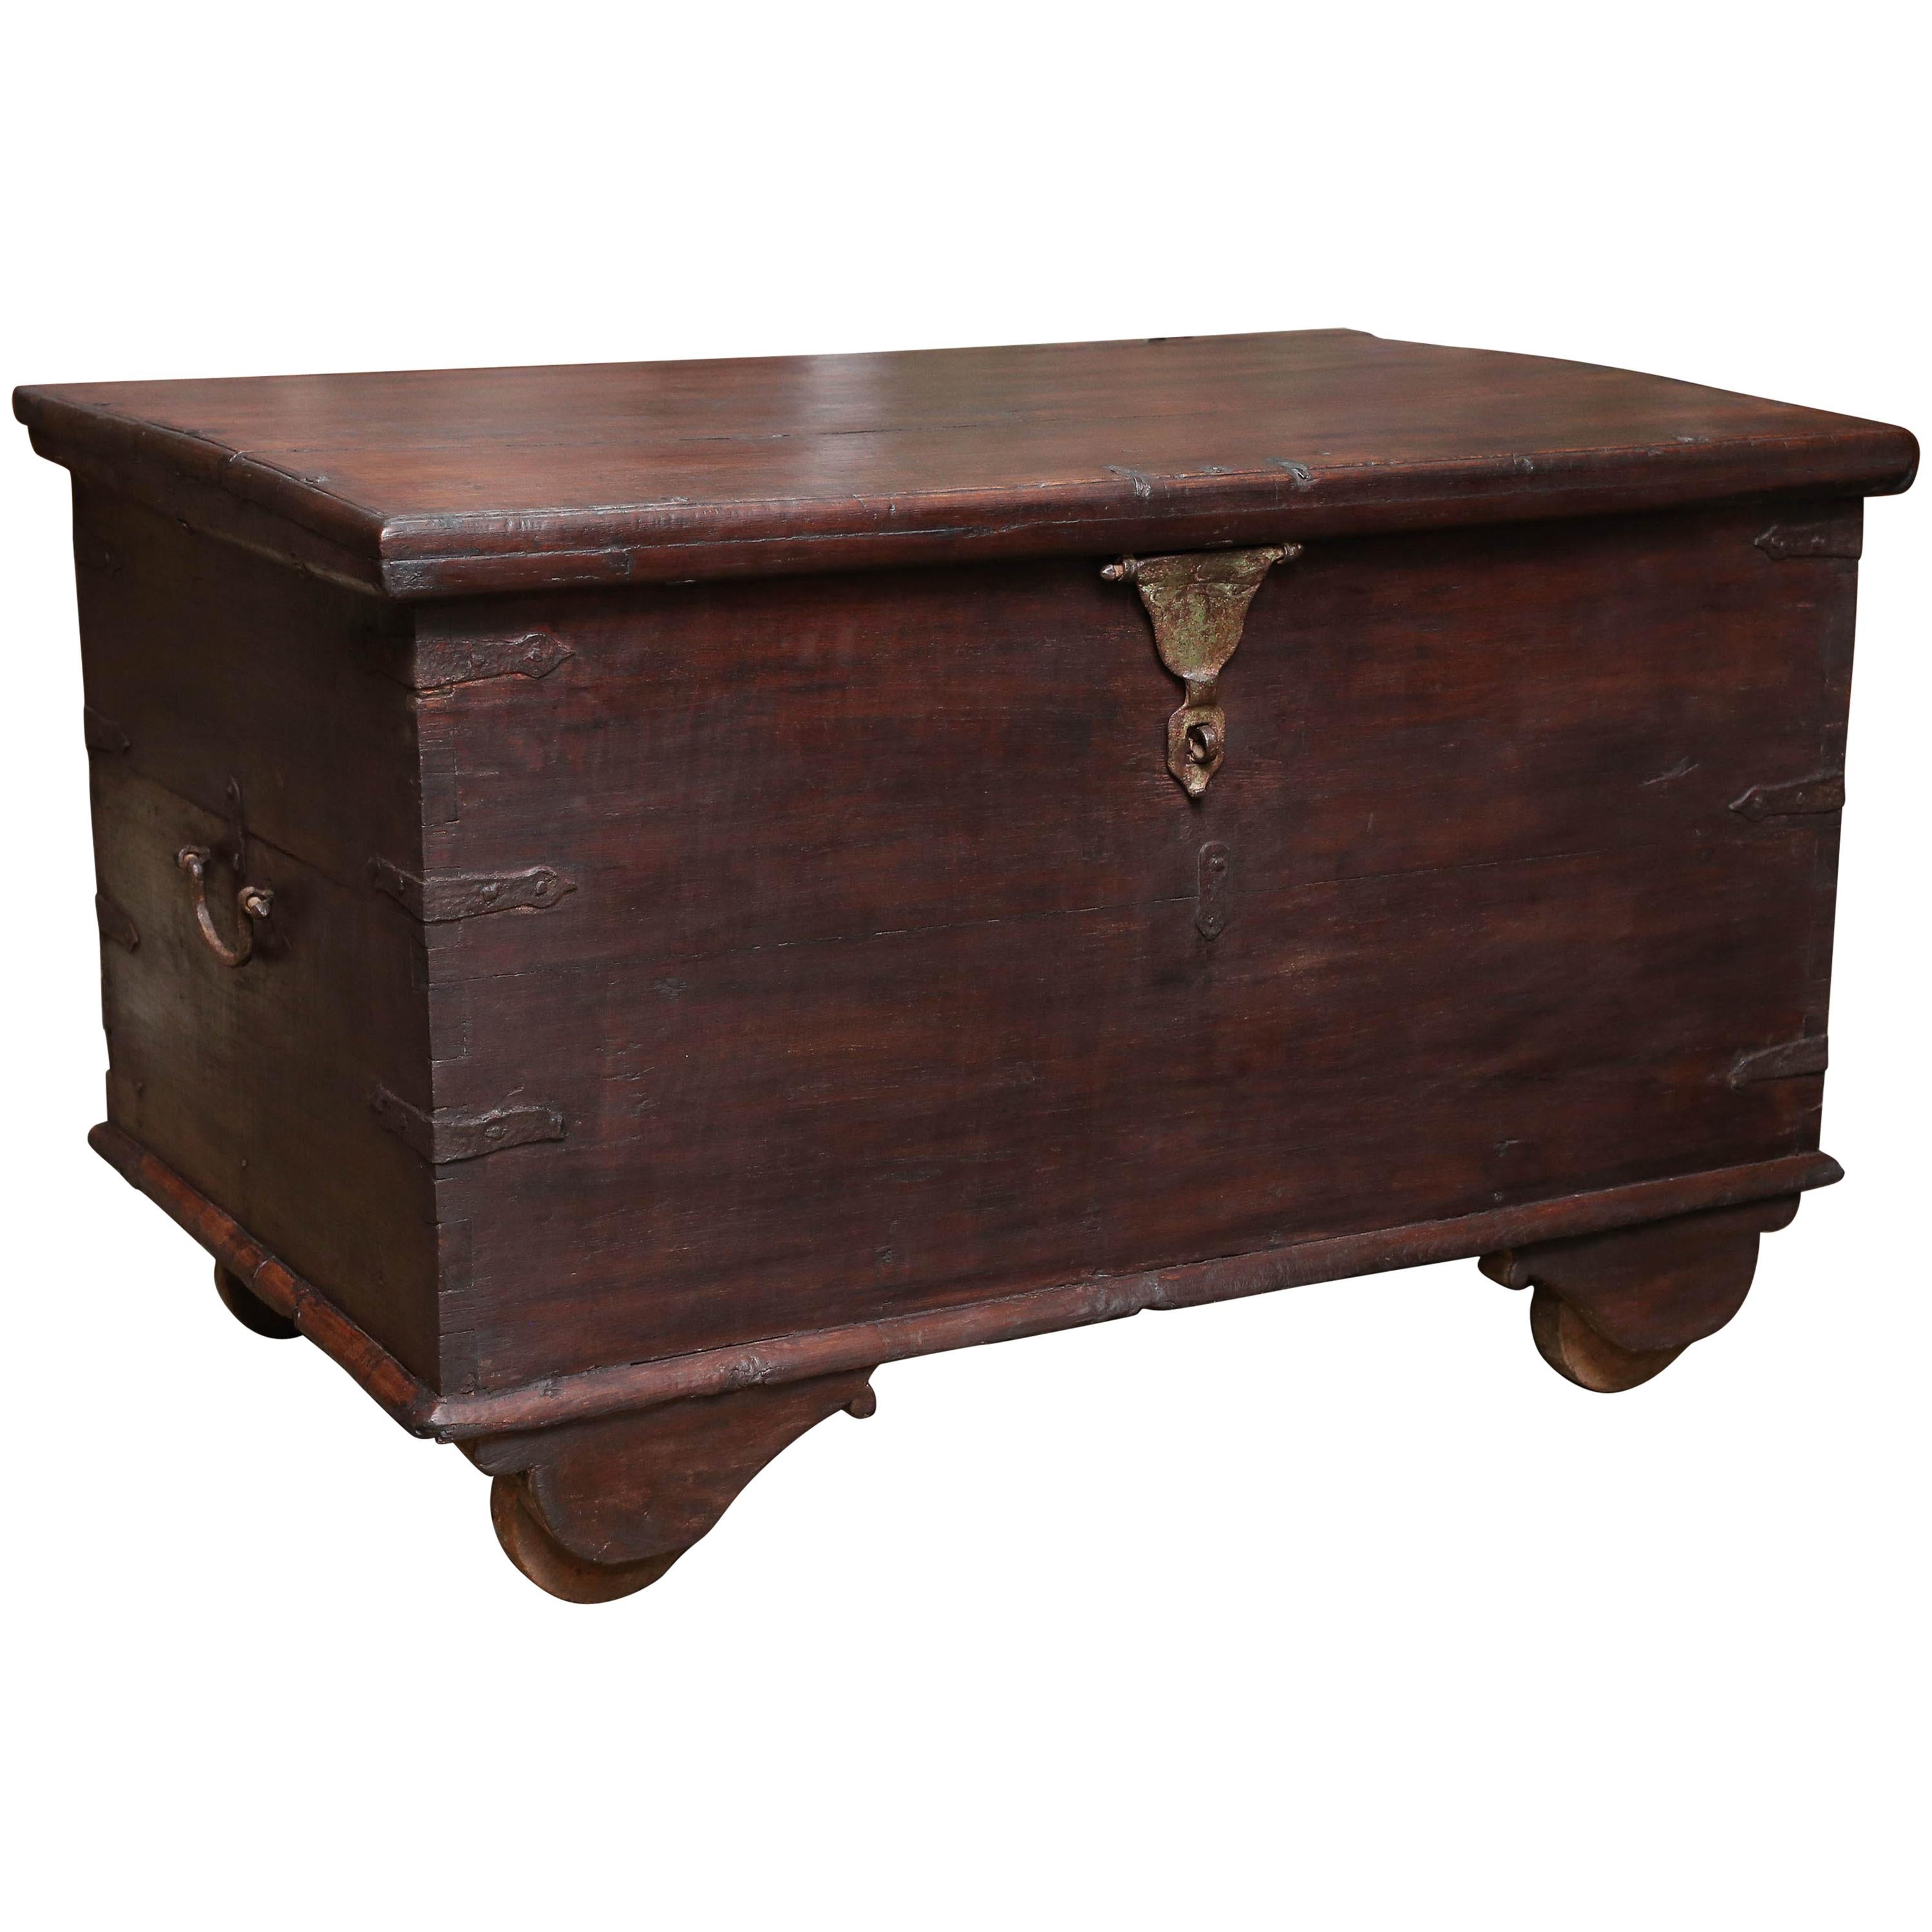 Early 19th Century Solid Teak Wood Dowry Chest from the Holy Town of Varanasi For Sale